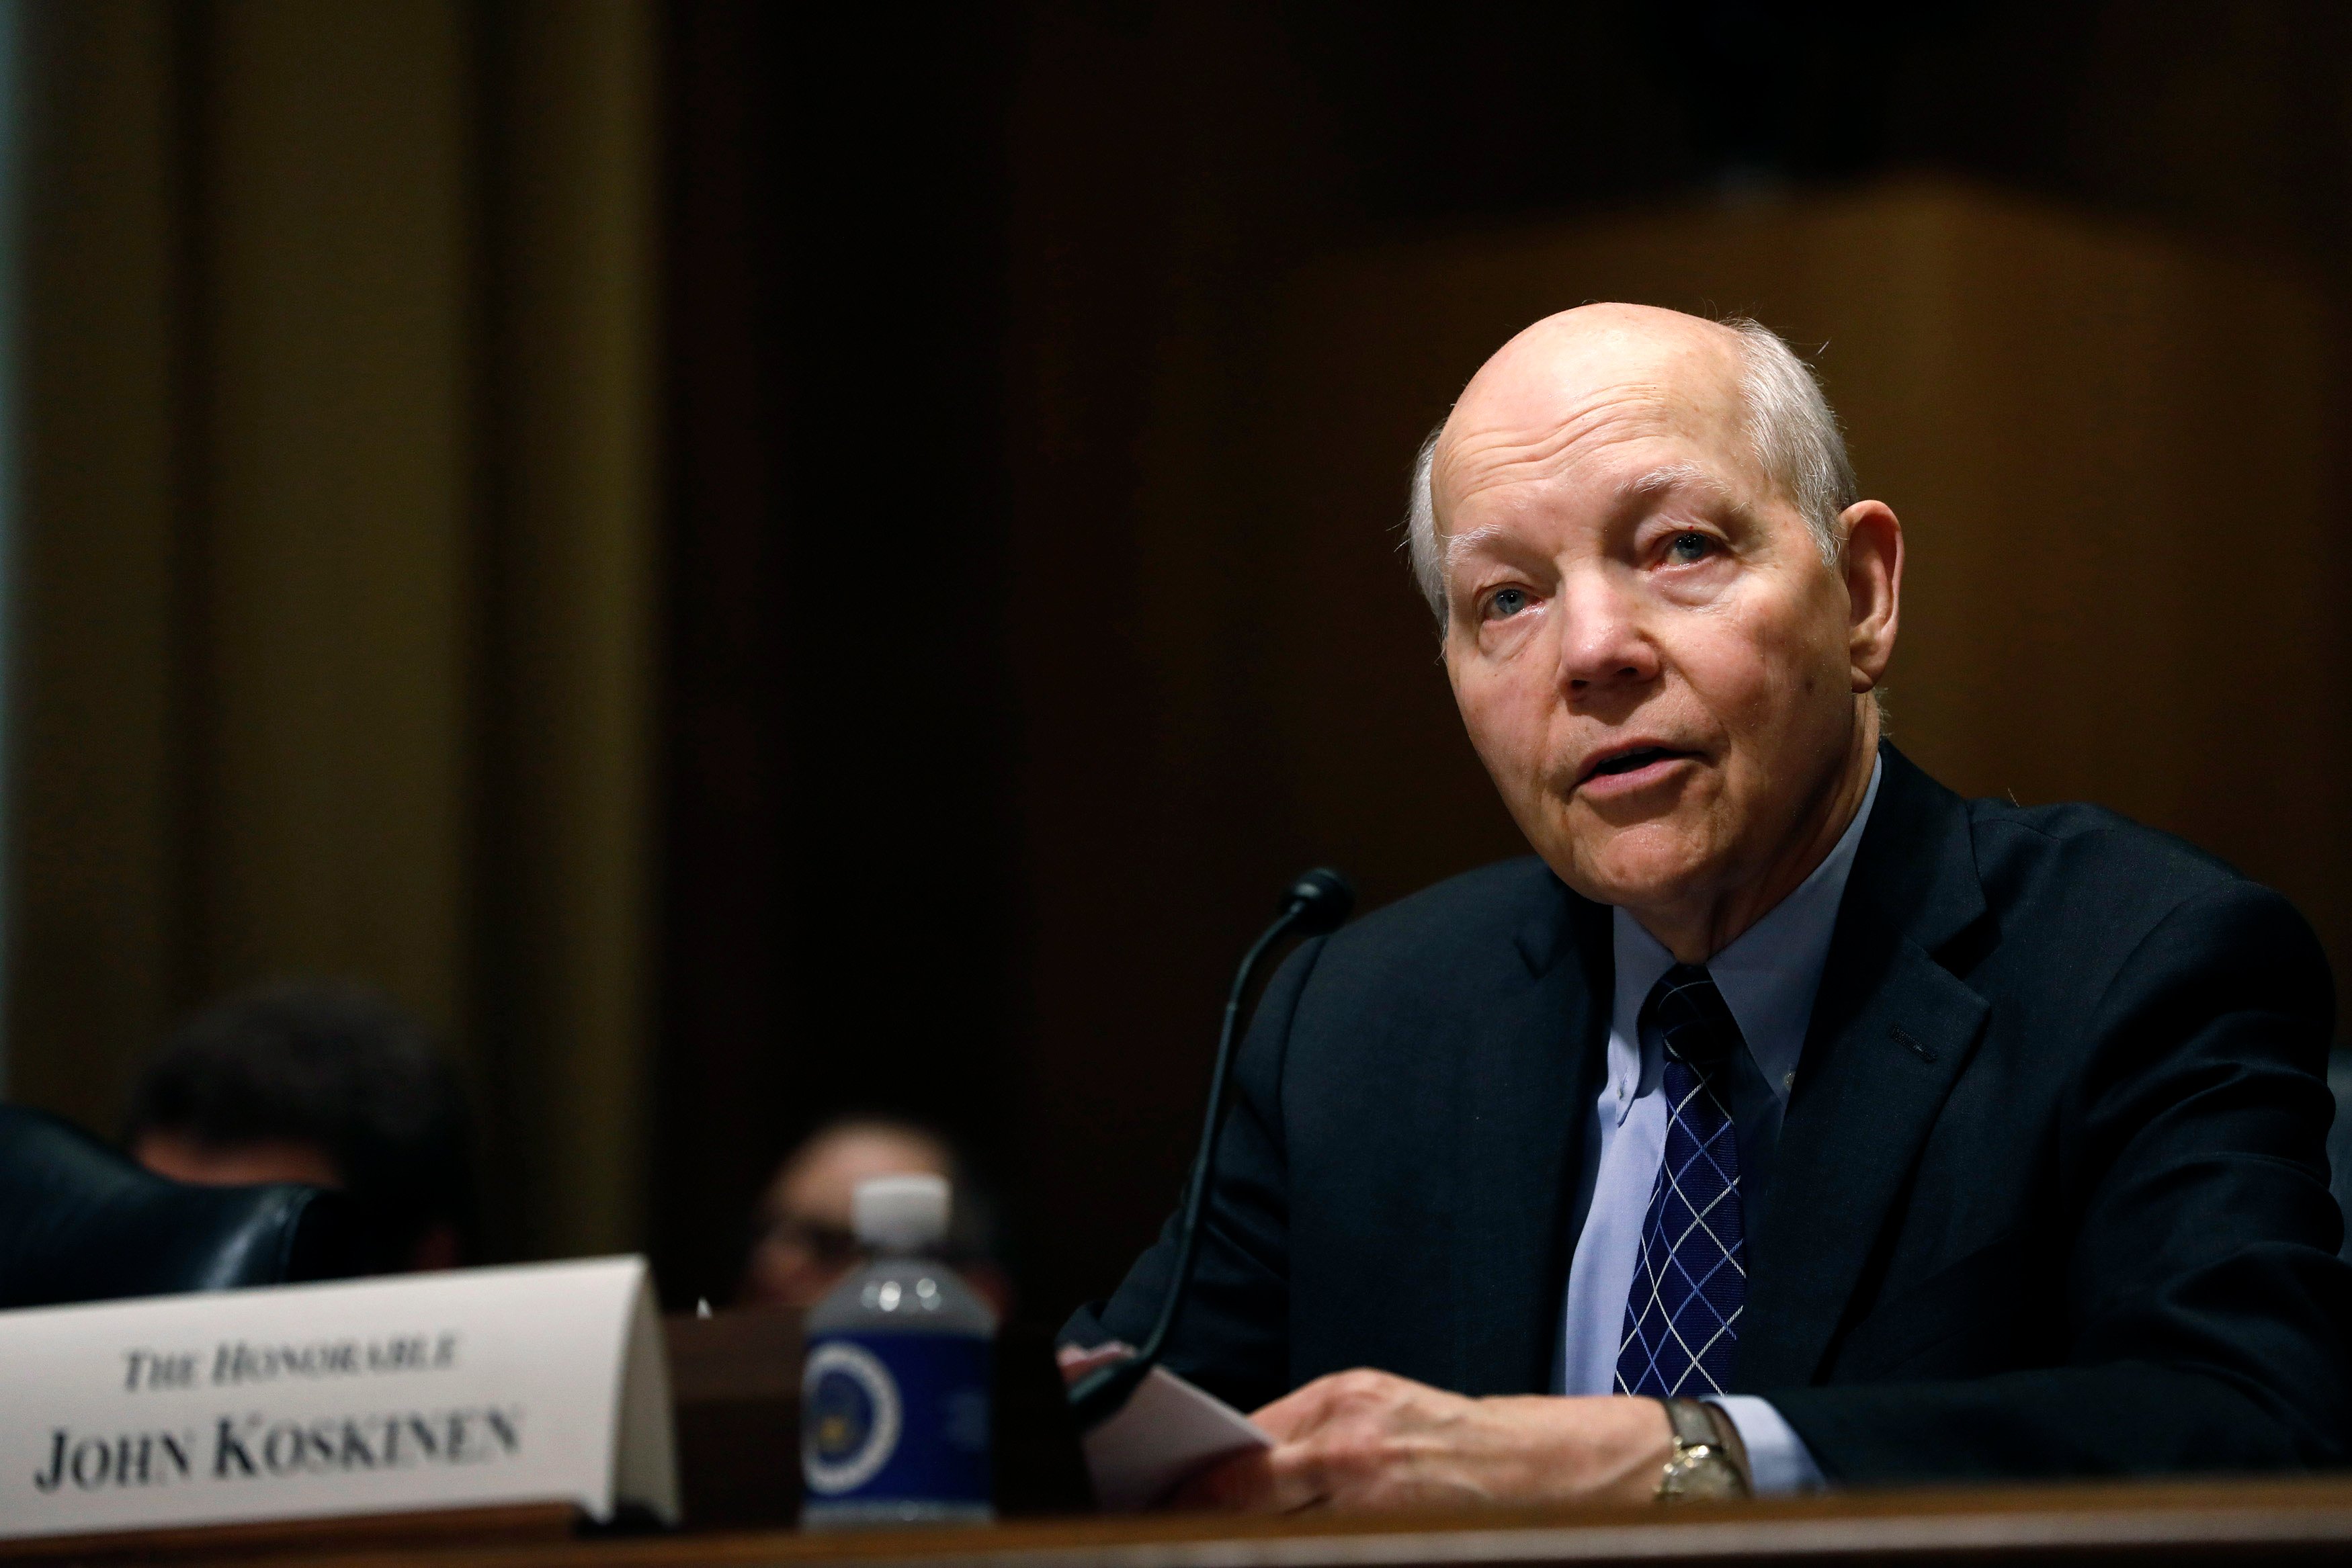 IRS Commissioner John Koskinen testifies before the Senate Finance Committee on Capitol Hill April 6, 2017 in Washington, DC. (Photo by Aaron P. Bernstein/Getty Images)